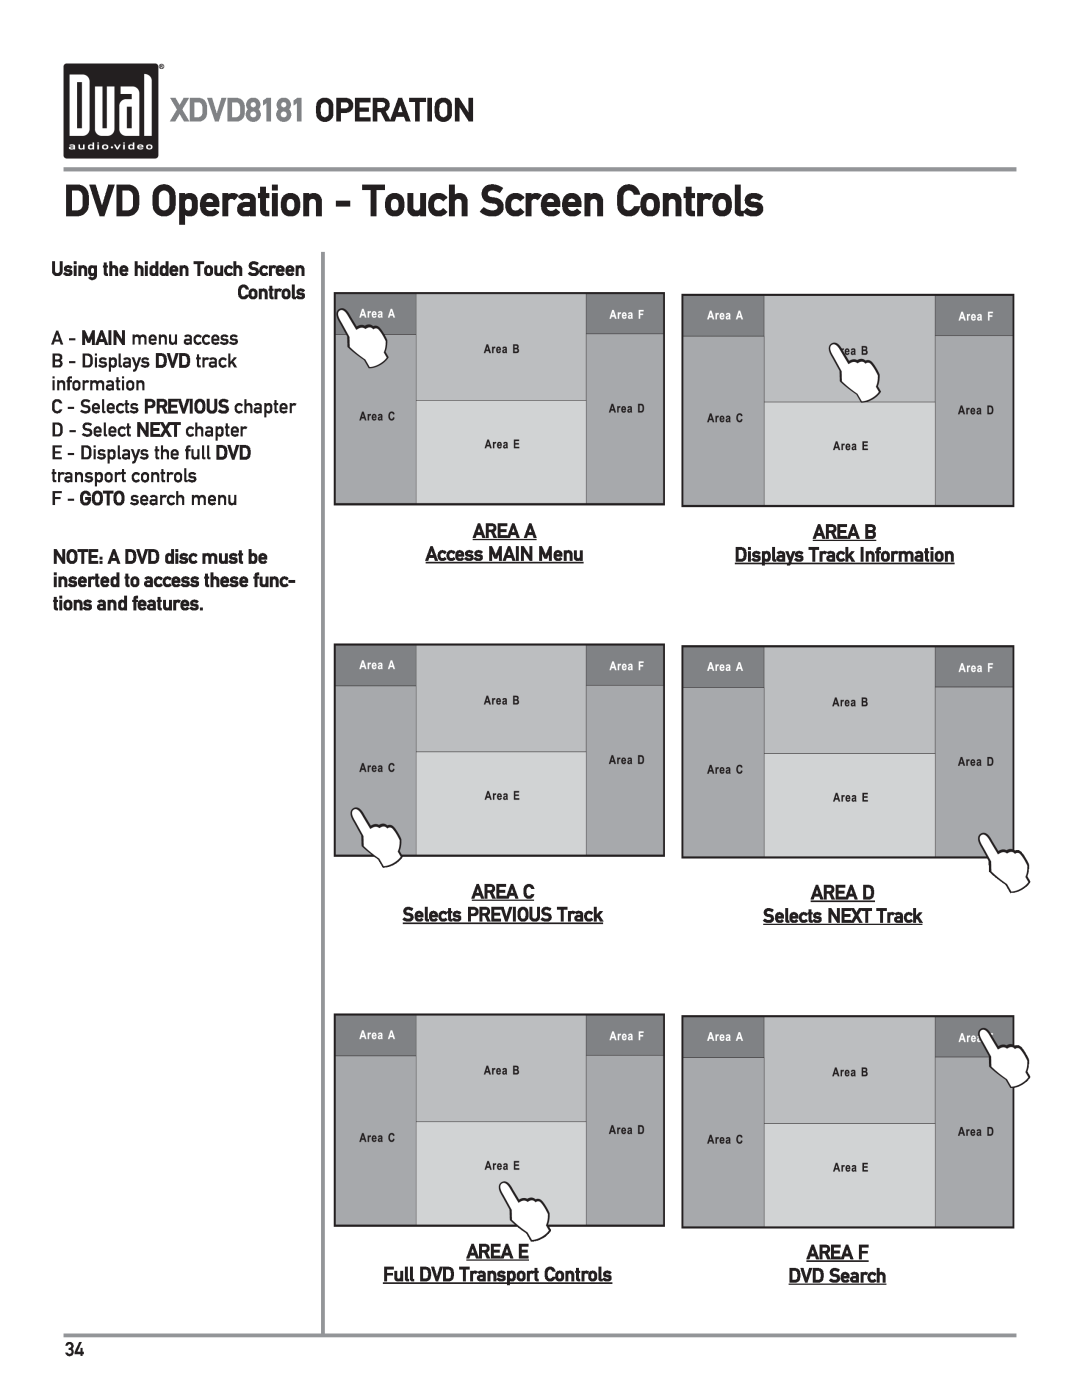 Dual DVD Operation - Touch Screen Controls, XDVD8181 OPERATION, AREA A Access MAIN Menu, AREA C Selects PREVIOUS Track 